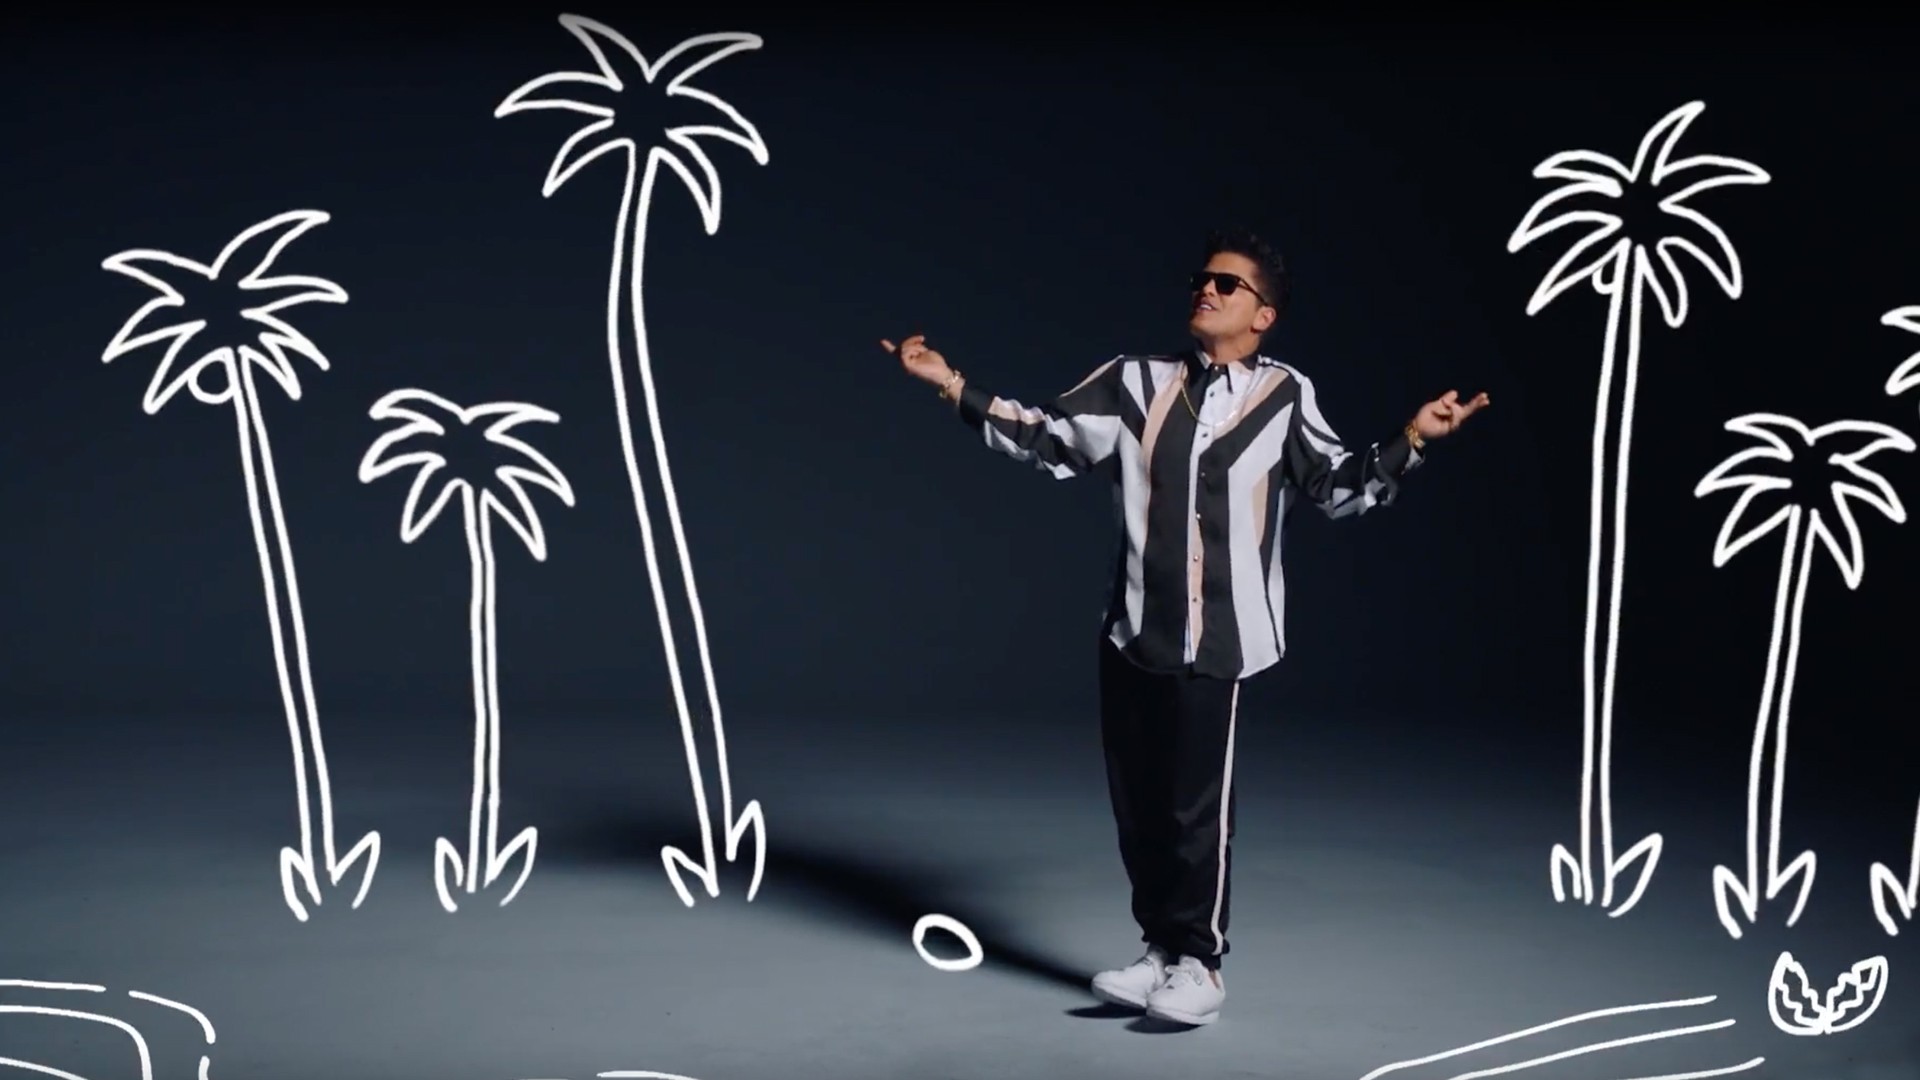 Bruno Mars Thats What I Like Wallpaper Hd - That's What I Like Official Video Bruno Mars , HD Wallpaper & Backgrounds